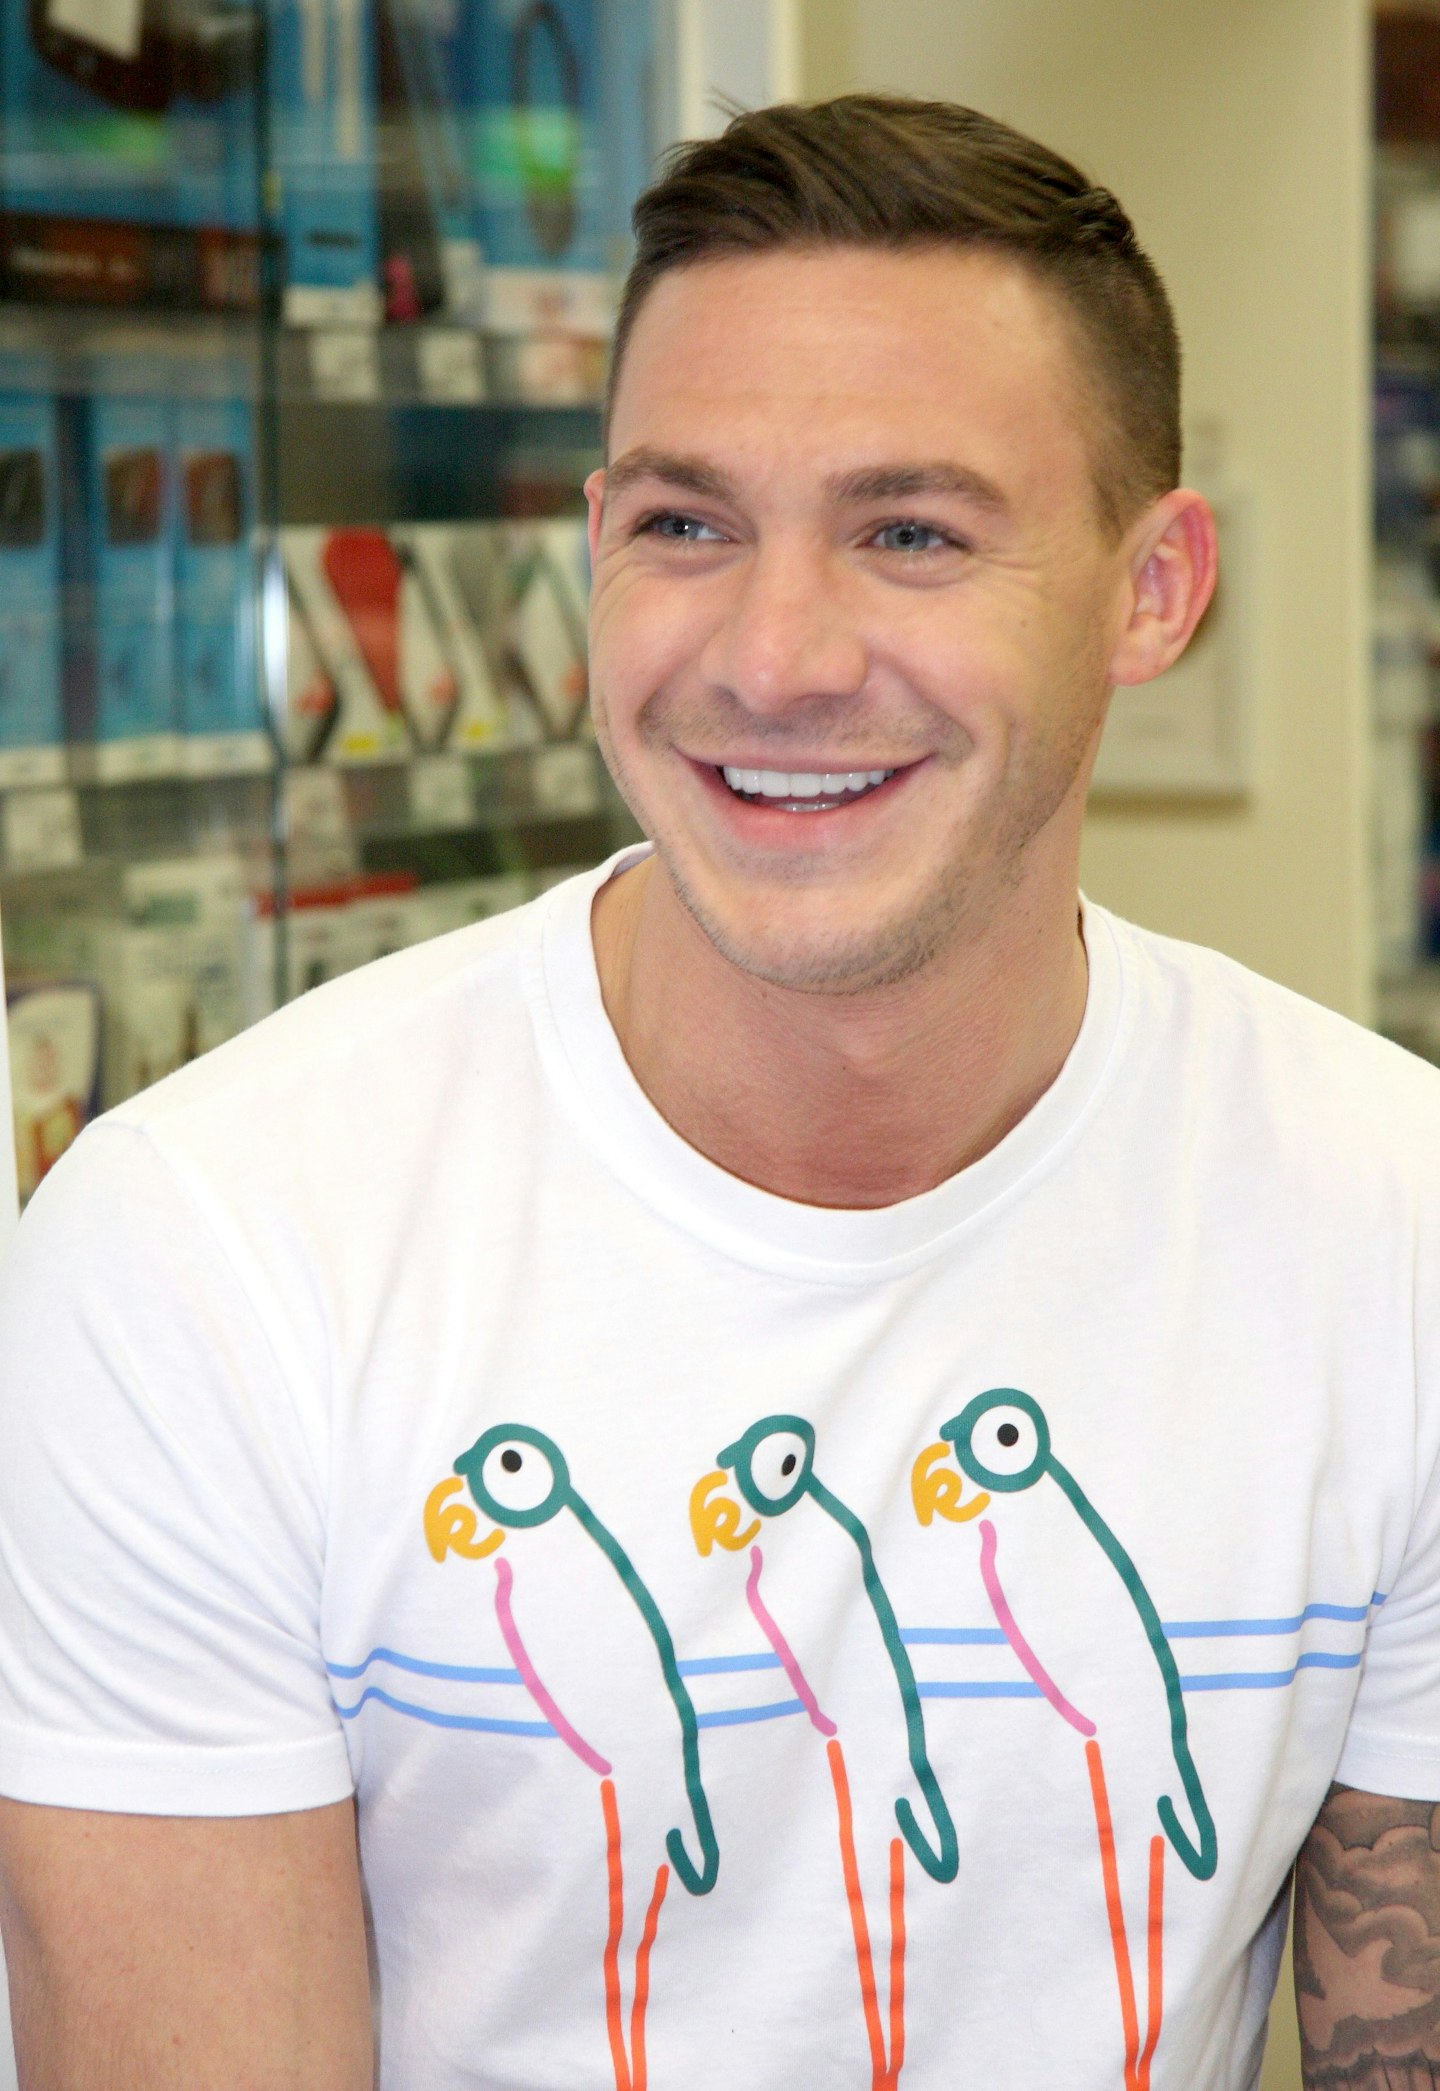 Kirk Norcross at his book signing in Derby